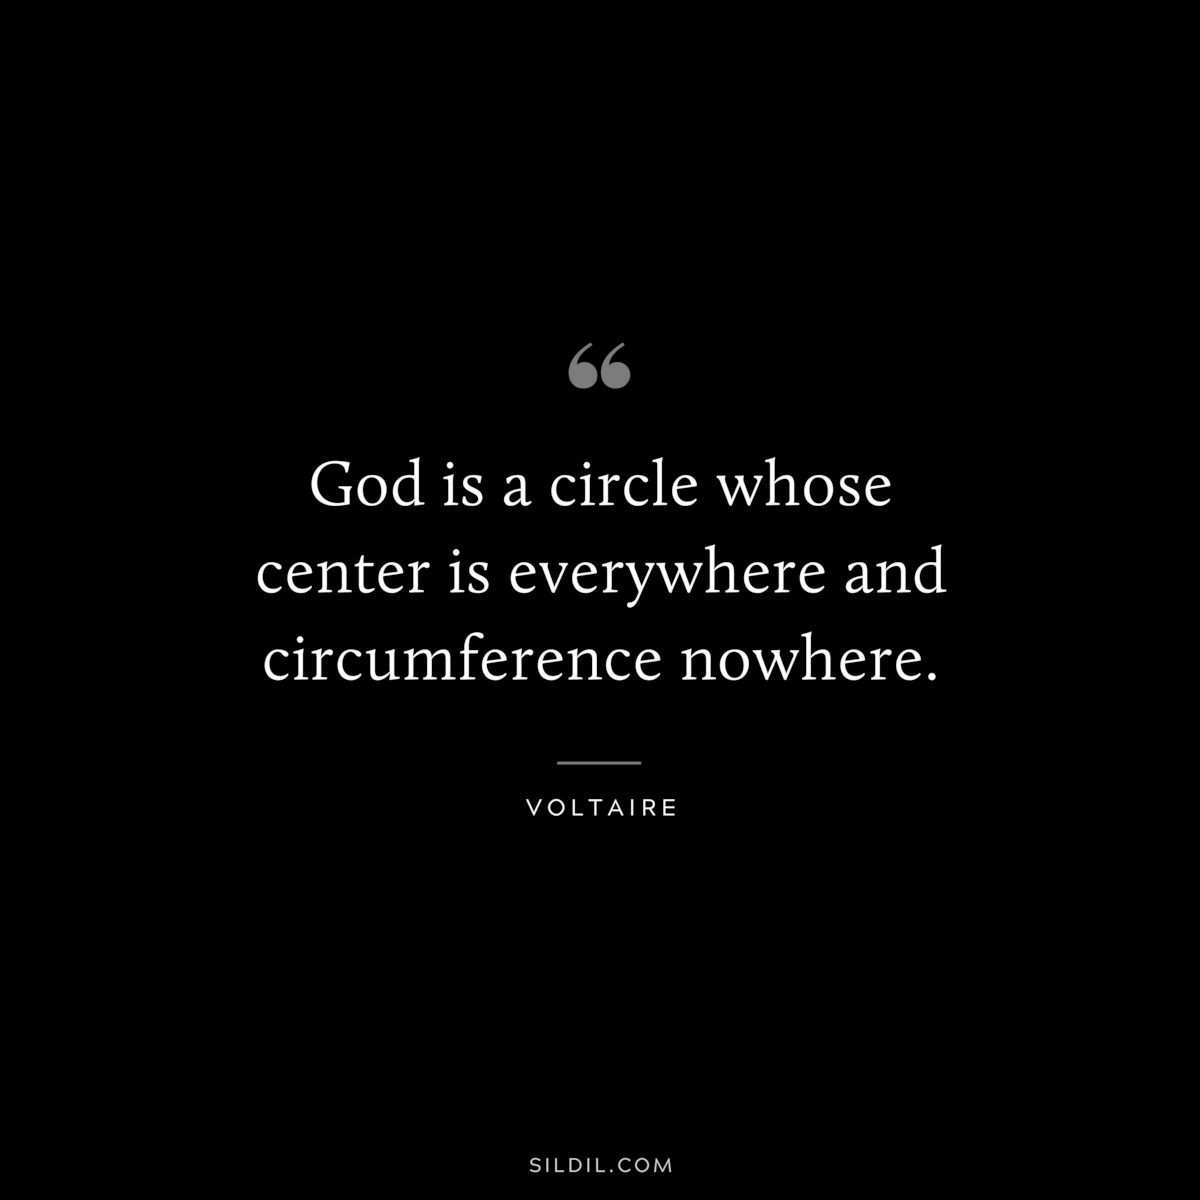 God is a circle whose center is everywhere and circumference nowhere. ― Voltaire